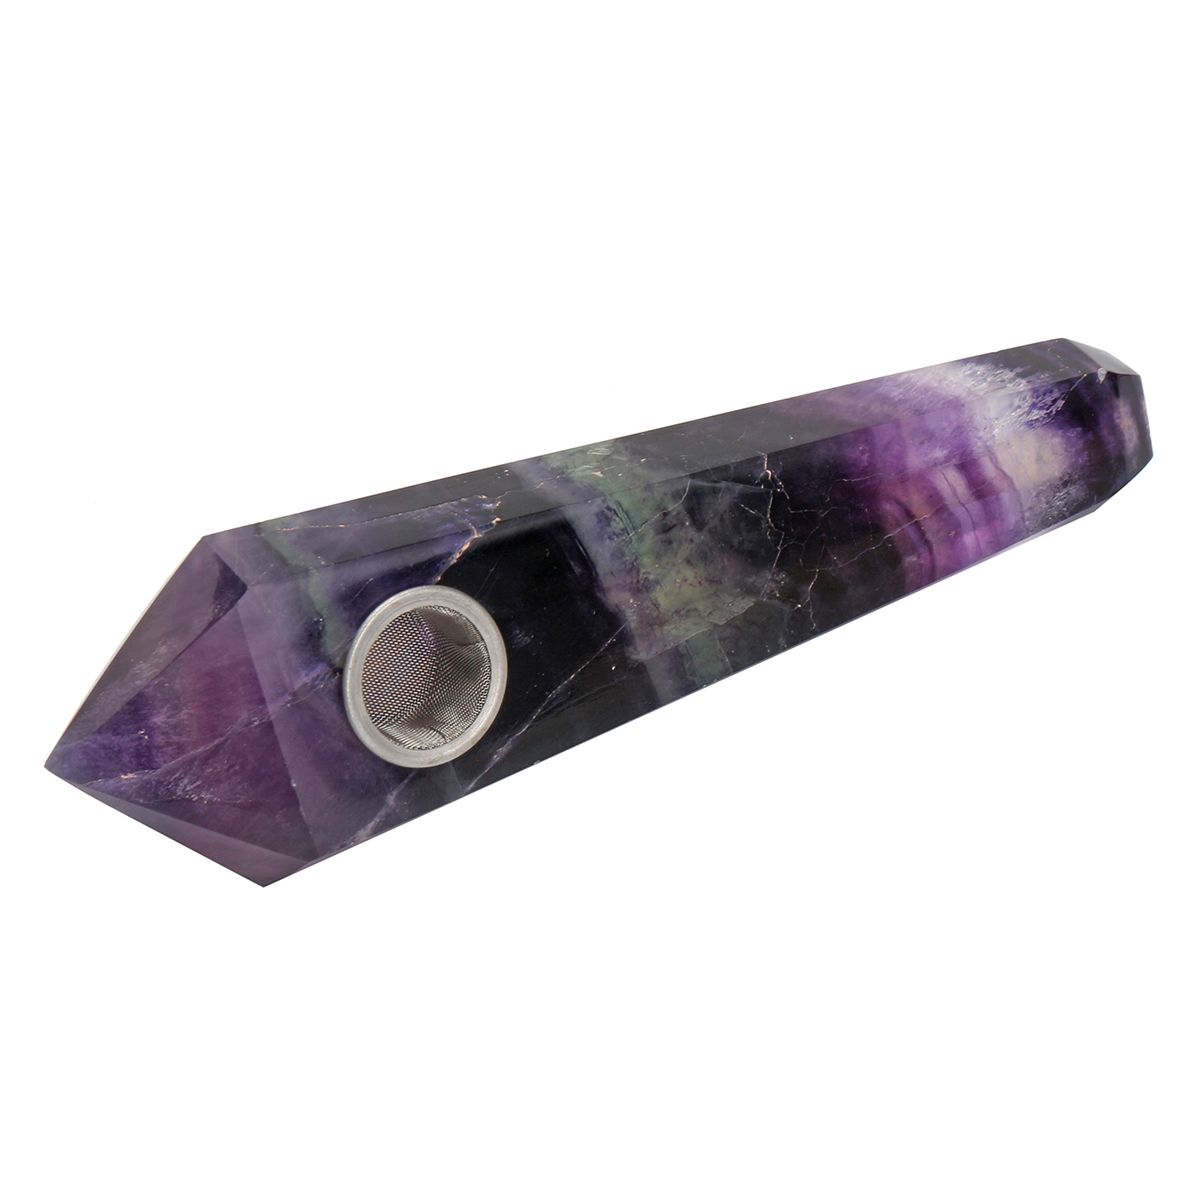 100-Natural-Purple-Fluorite-Quartz-Crystal-Wand-Pipe-Healing-with-Carb-Hole-1232350